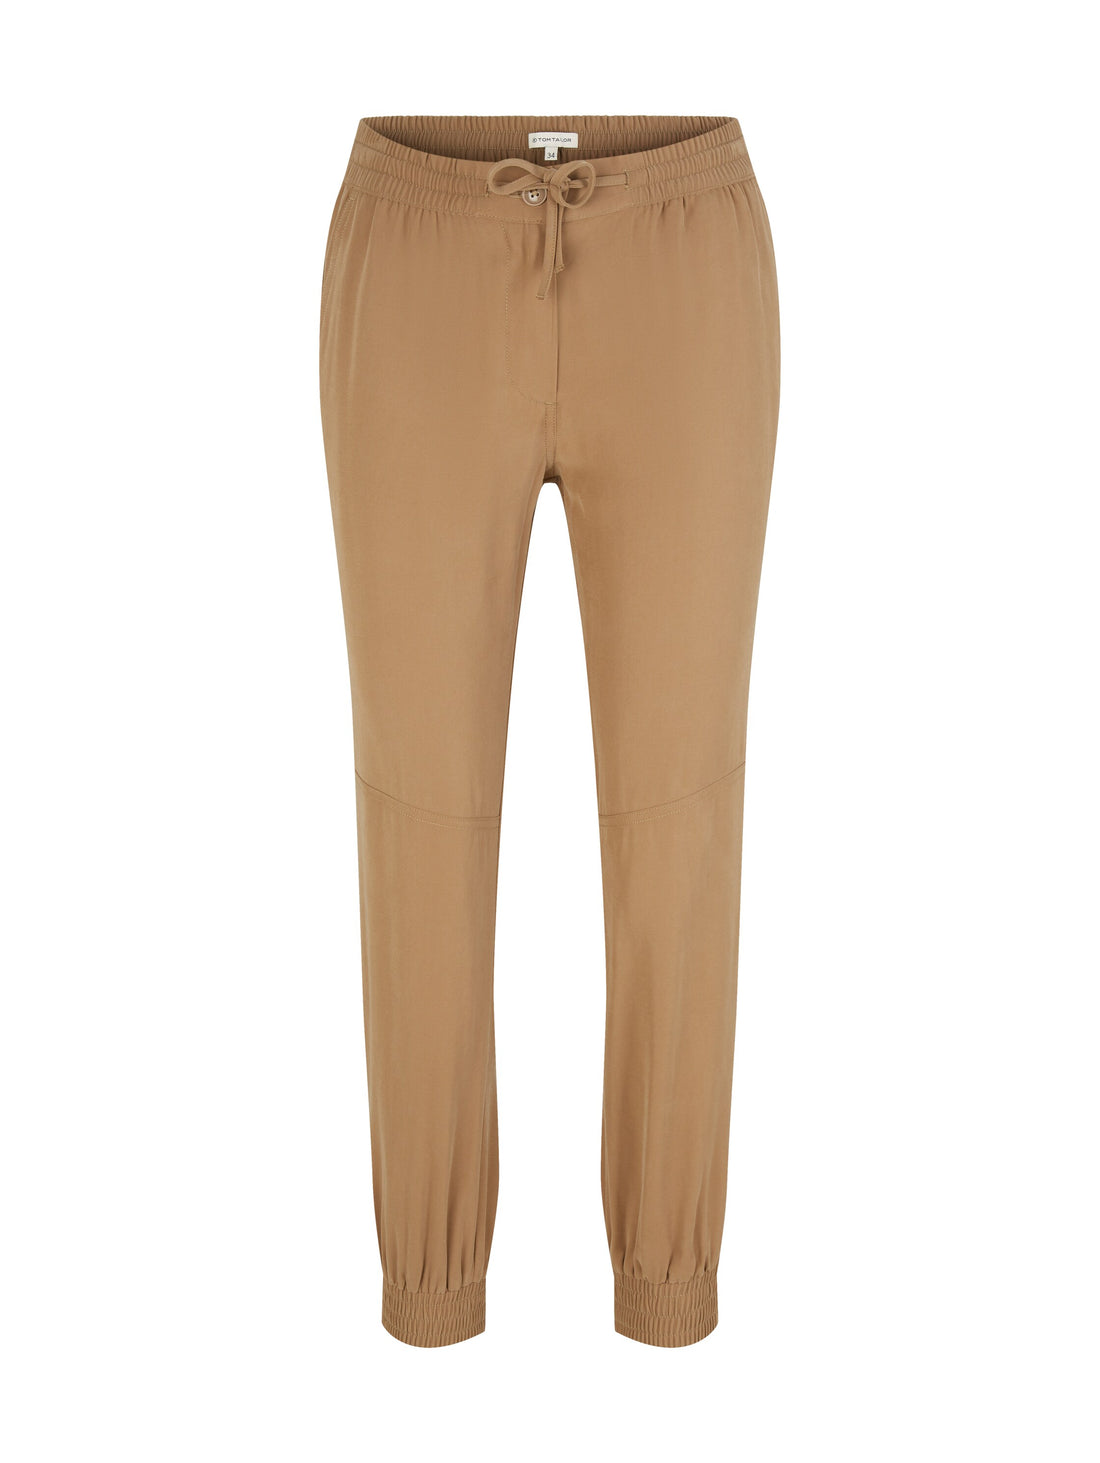 Beige Jogger Style Trousers